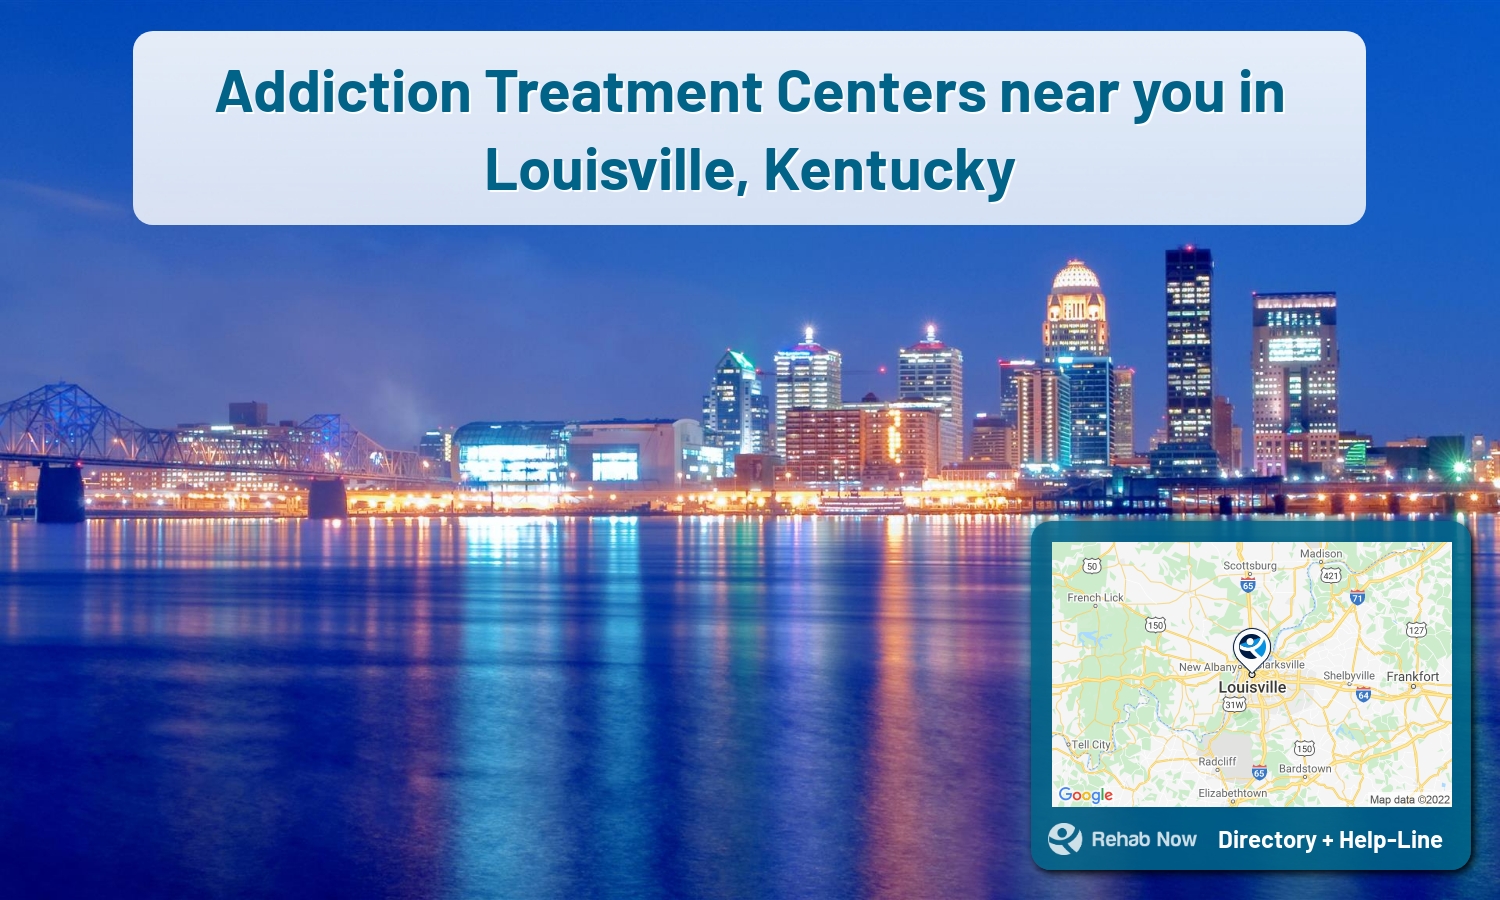 Our experts can help you find treatment now in Louisville, Kentucky. We list drug rehab and alcohol centers in Kentucky.